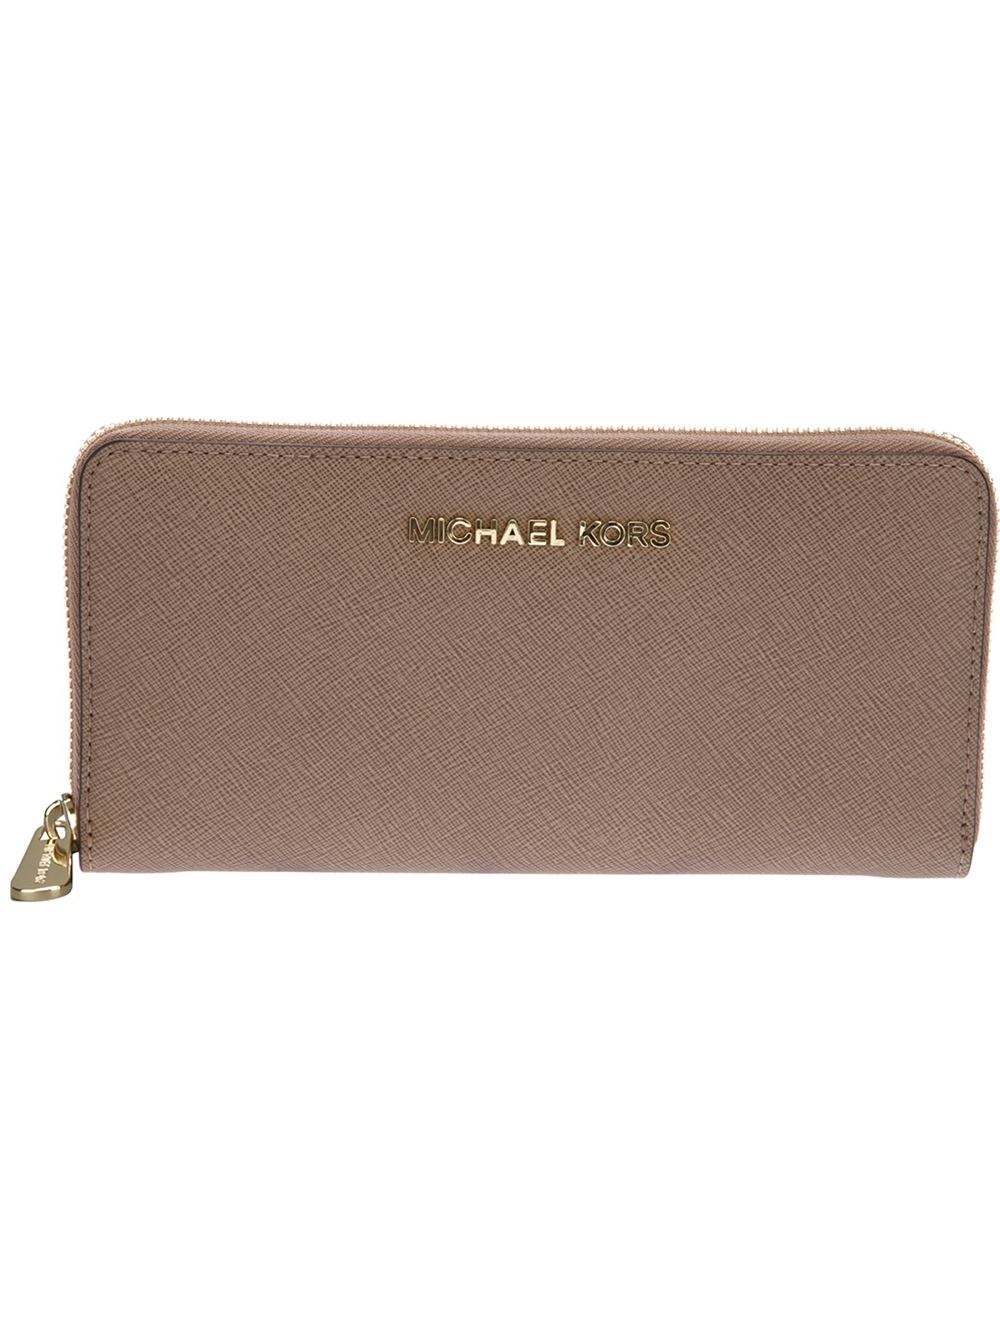 Michael Kors Jet Set Continental Wallet in Natural | Lyst